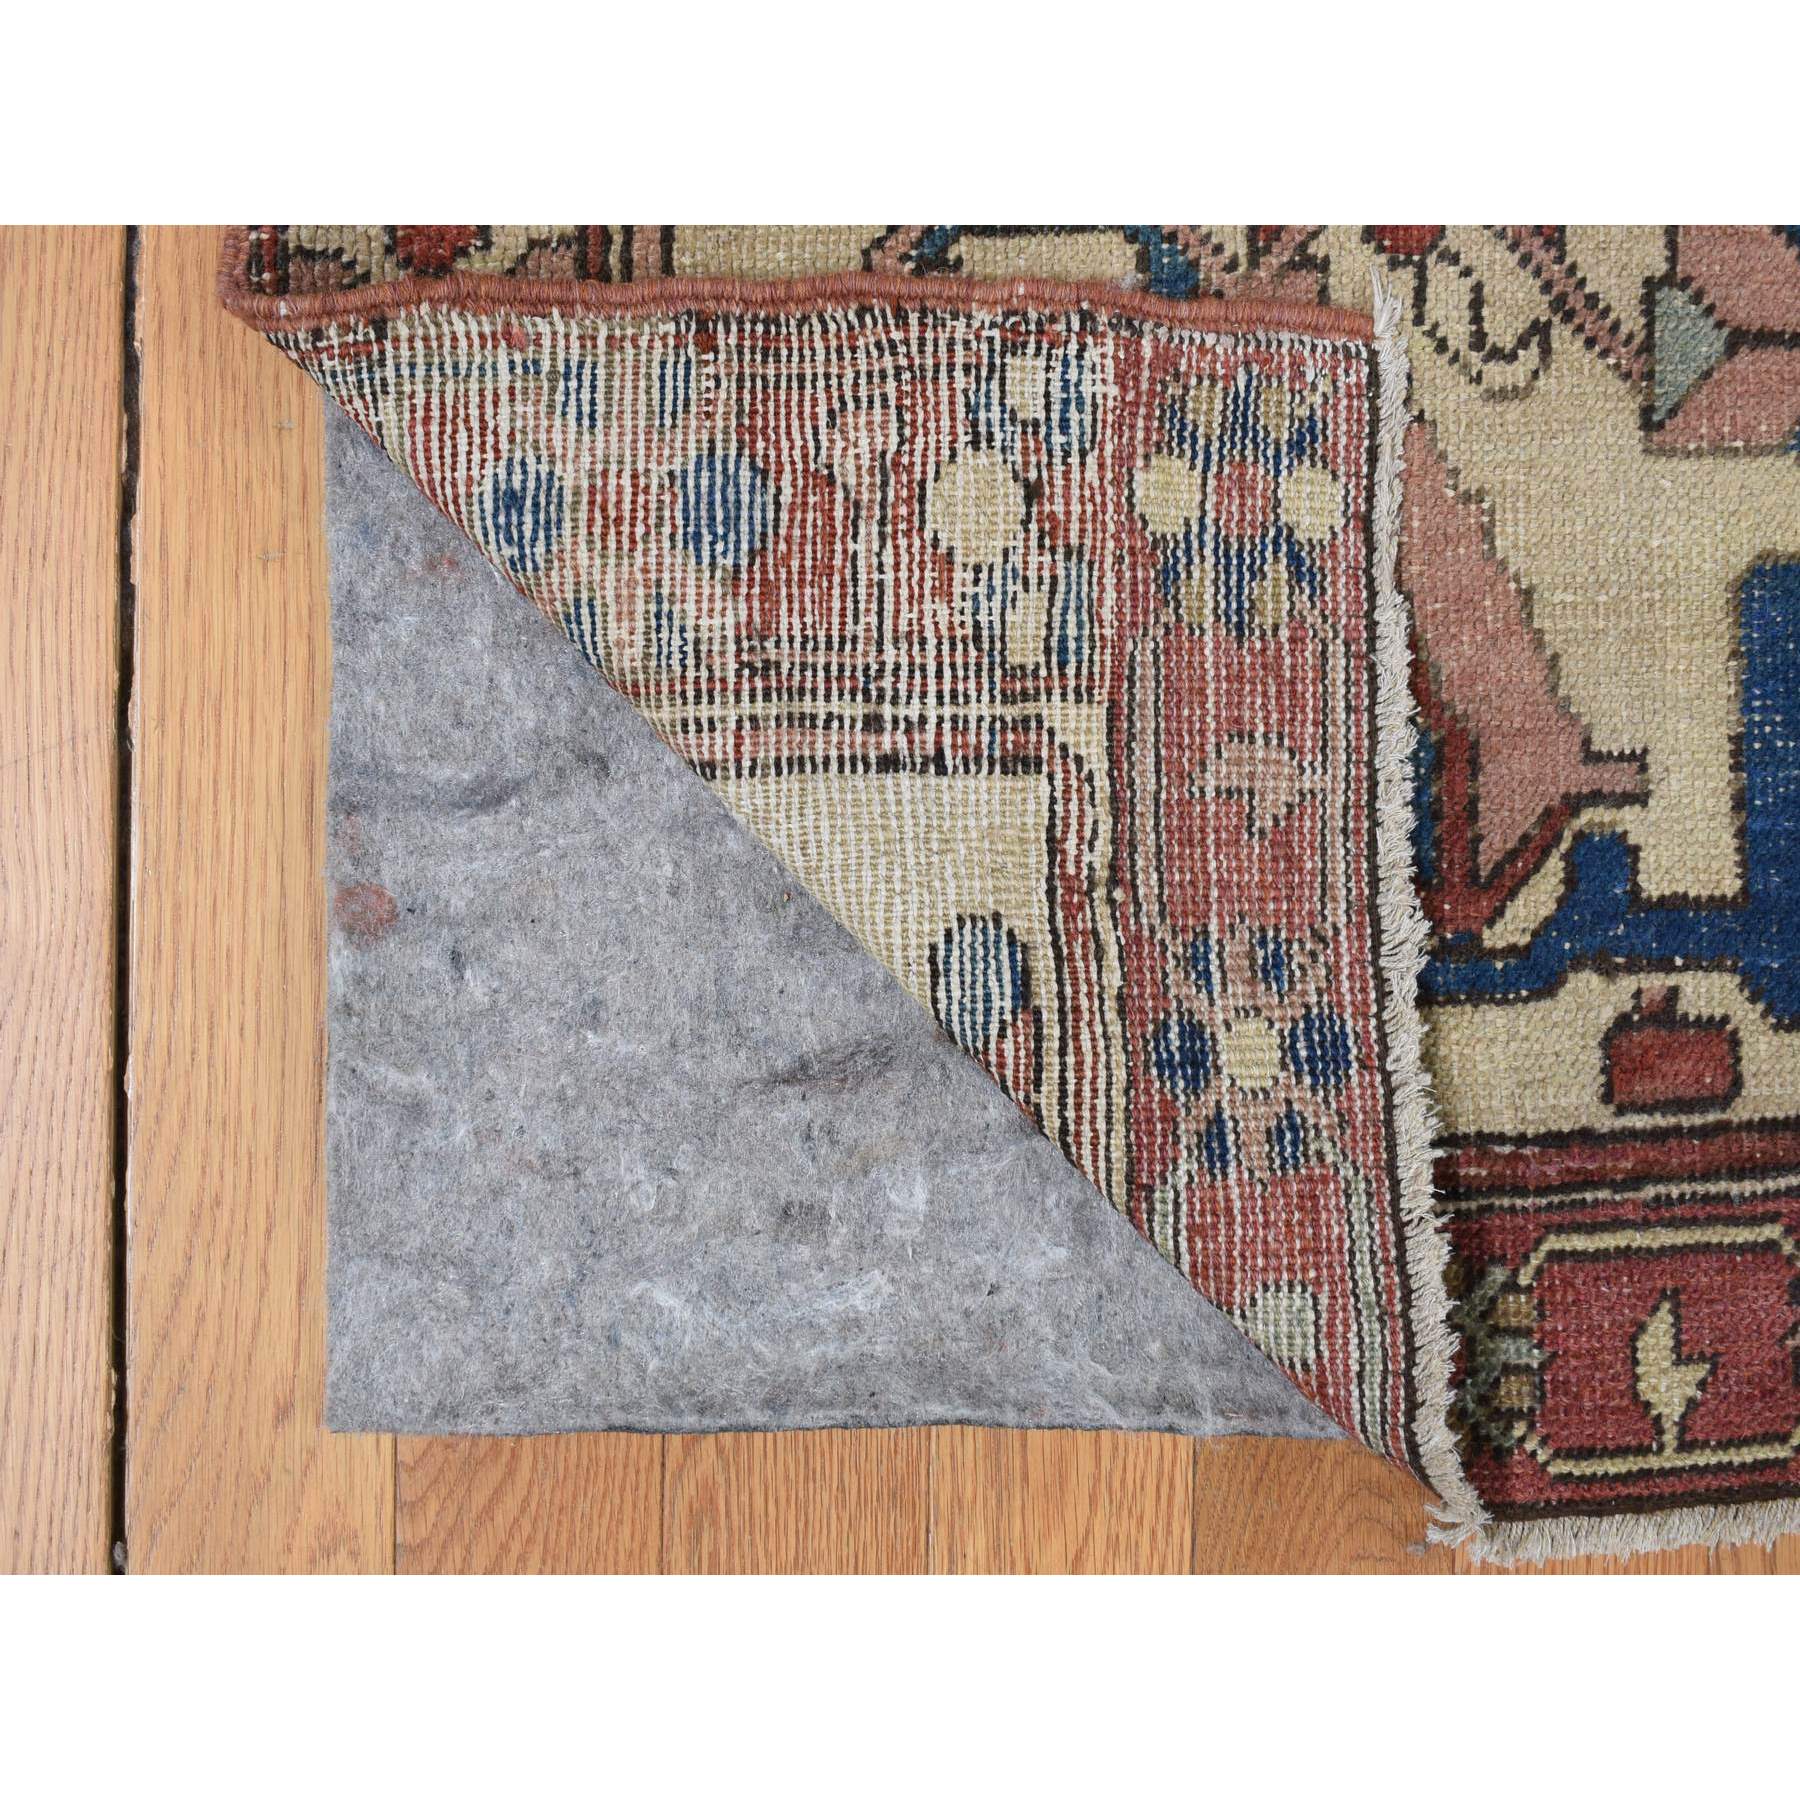  Wool Hand-Knotted Area Rug 11'3